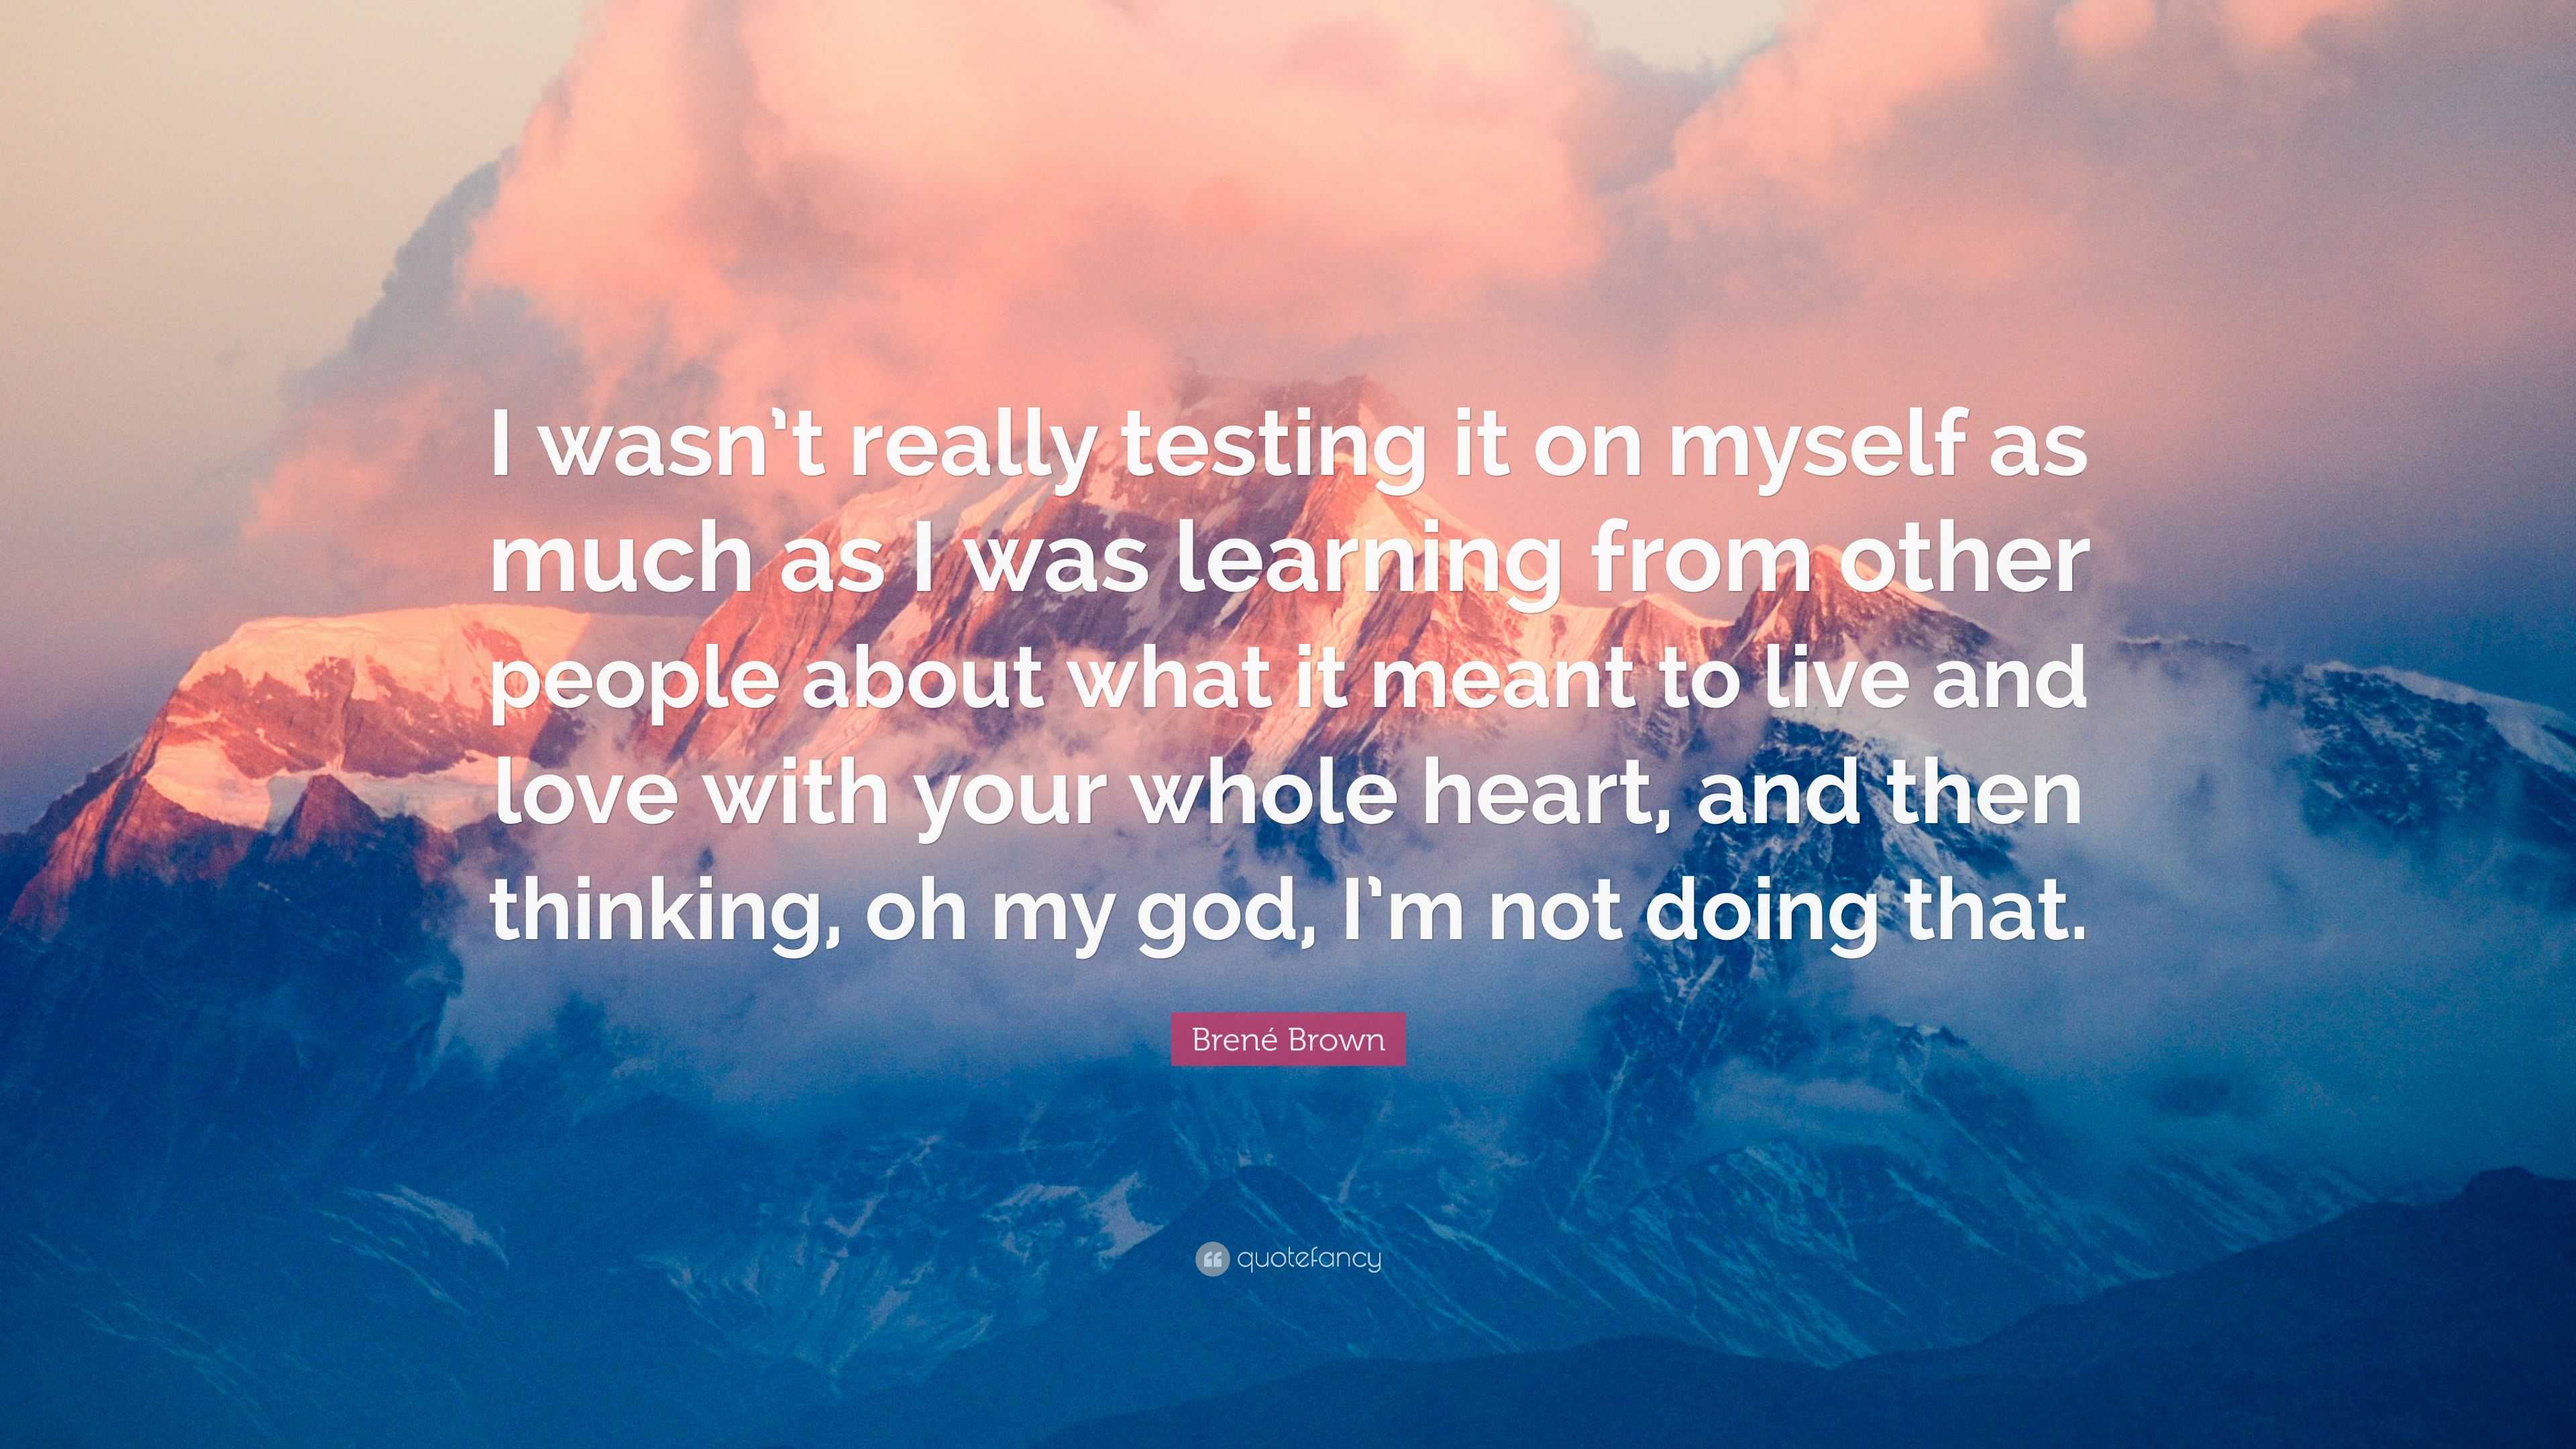 Brené Brown Quote “I wasn t really testing it on myself as much